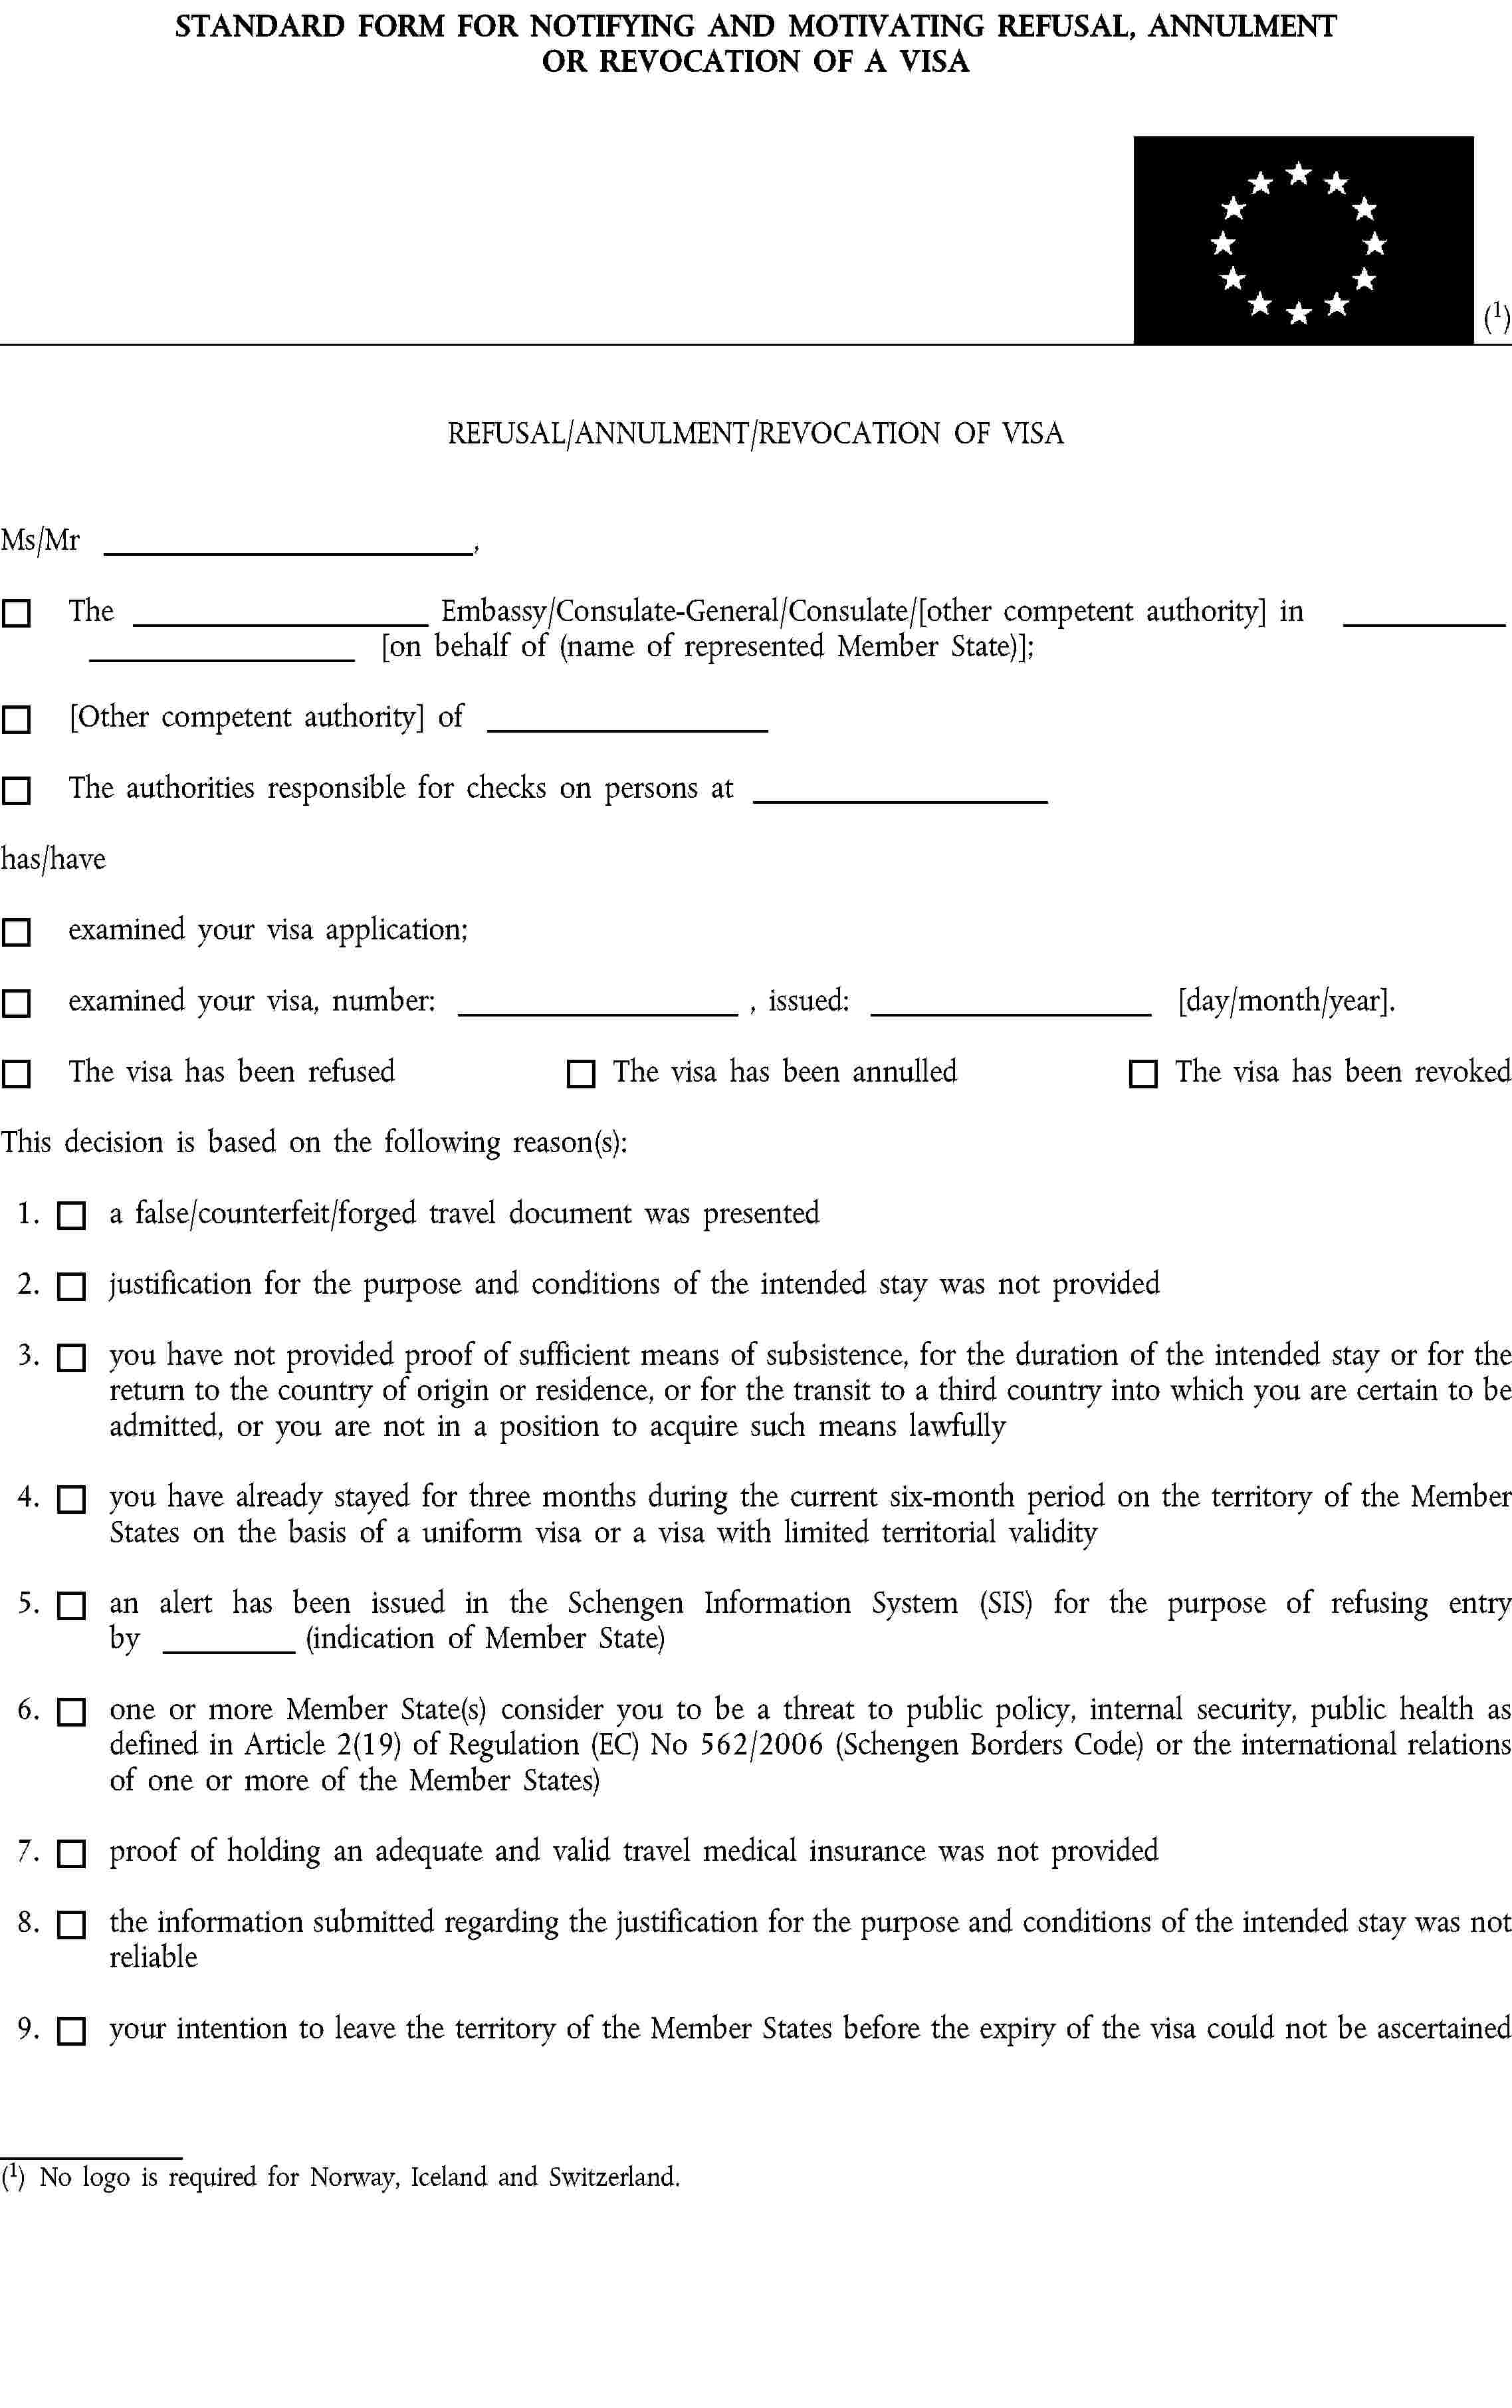 STANDARD FORM FOR NOTIFYING AND MOTIVATING REFUSAL, ANNULMENT OR REVOCATION OF A VISA(1)REFUSAL/ANNULMENT/REVOCATION OF VISAMs/Mr ,The Embassy/Consulate-General/Consulate/[other competent authority] in [on behalf of (name of represented Member State)];[Other competent authority] ofThe authorities responsible for checks on persons athas/haveexamined your visa application;examined your visa, number: , issued: [day/month/year].The visa has been refusedThe visa has been annulledThe visa has been revokedThis decision is based on the following reason(s):1. a false/counterfeit/forged travel document was presented2. justification for the purpose and conditions of the intended stay was not provided3. you have not provided proof of sufficient means of subsistence, for the duration of the intended stay or for the return to the country of origin or residence, or for the transit to a third country into which you are certain to be admitted, or you are not in a position to acquire such means lawfully4. you have already stayed for three months during the current six-month period on the territory of the Member States on the basis of a uniform visa or a visa with limited territorial validity5. an alert has been issued in the Schengen Information System (SIS) for the purpose of refusing entry by (indication of Member State)6. one or more Member State(s) consider you to be a threat to public policy, internal security, public health as defined in Article 2(19) of Regulation (EC) No 562/2006 (Schengen Borders Code) or the international relations of one or more of the Member States)7. proof of holding an adequate and valid travel medical insurance was not provided8. the information submitted regarding the justification for the purpose and conditions of the intended stay was not reliable9. your intention to leave the territory of the Member States before the expiry of the visa could not be ascertained(1) No logo is required for Norway, Iceland and Switzerland.